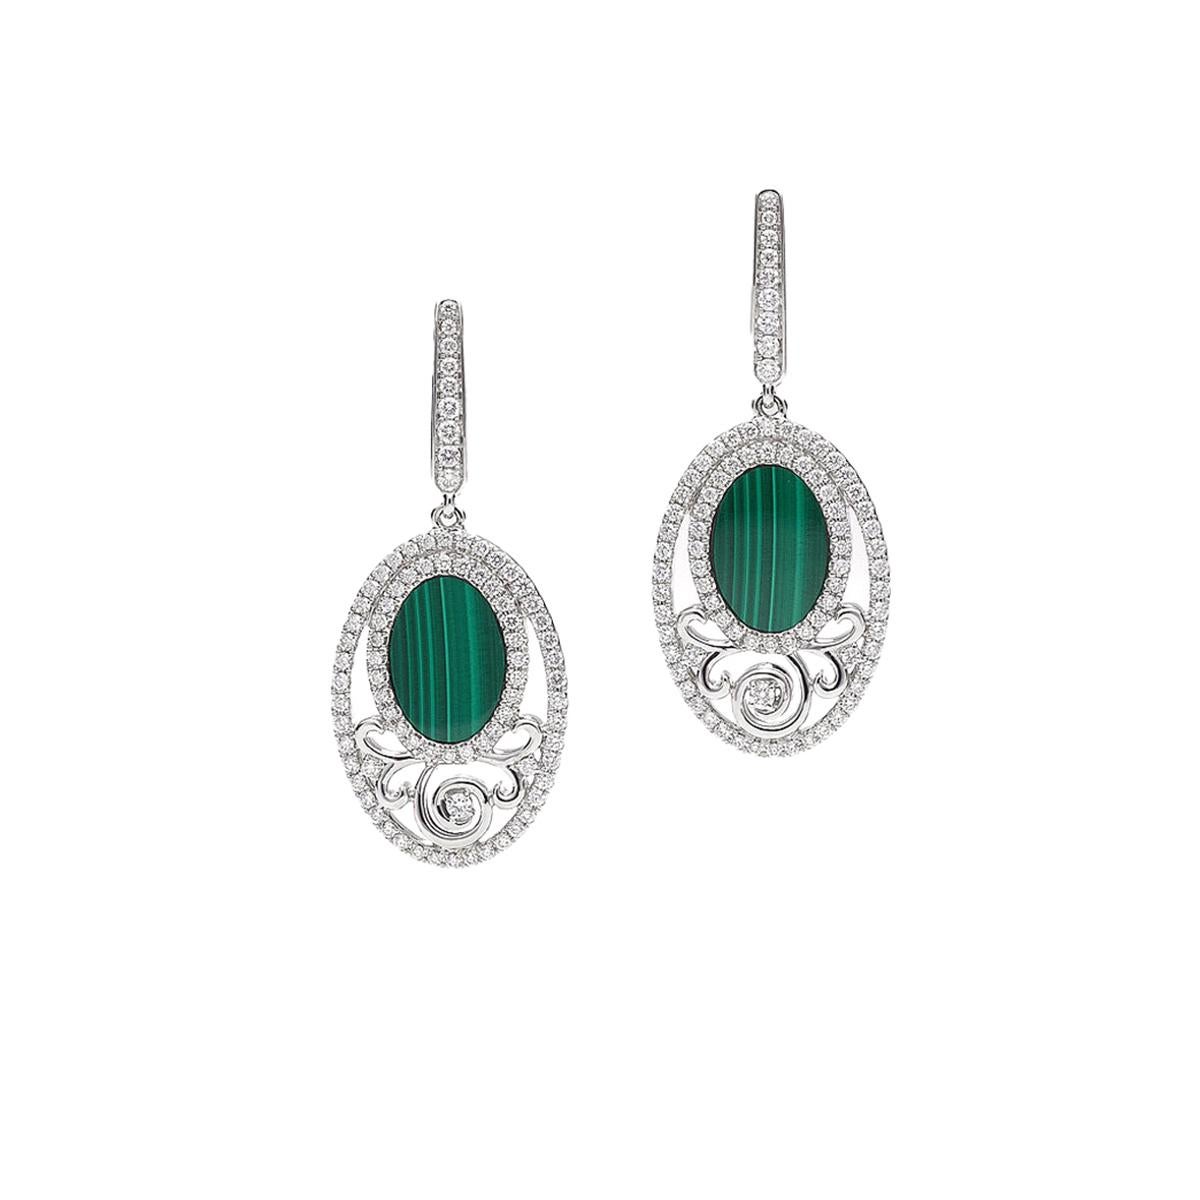 Earrings in 18kt white gold set with 168 diamonds 1.10 cts and 2 malachites 3.88 cts